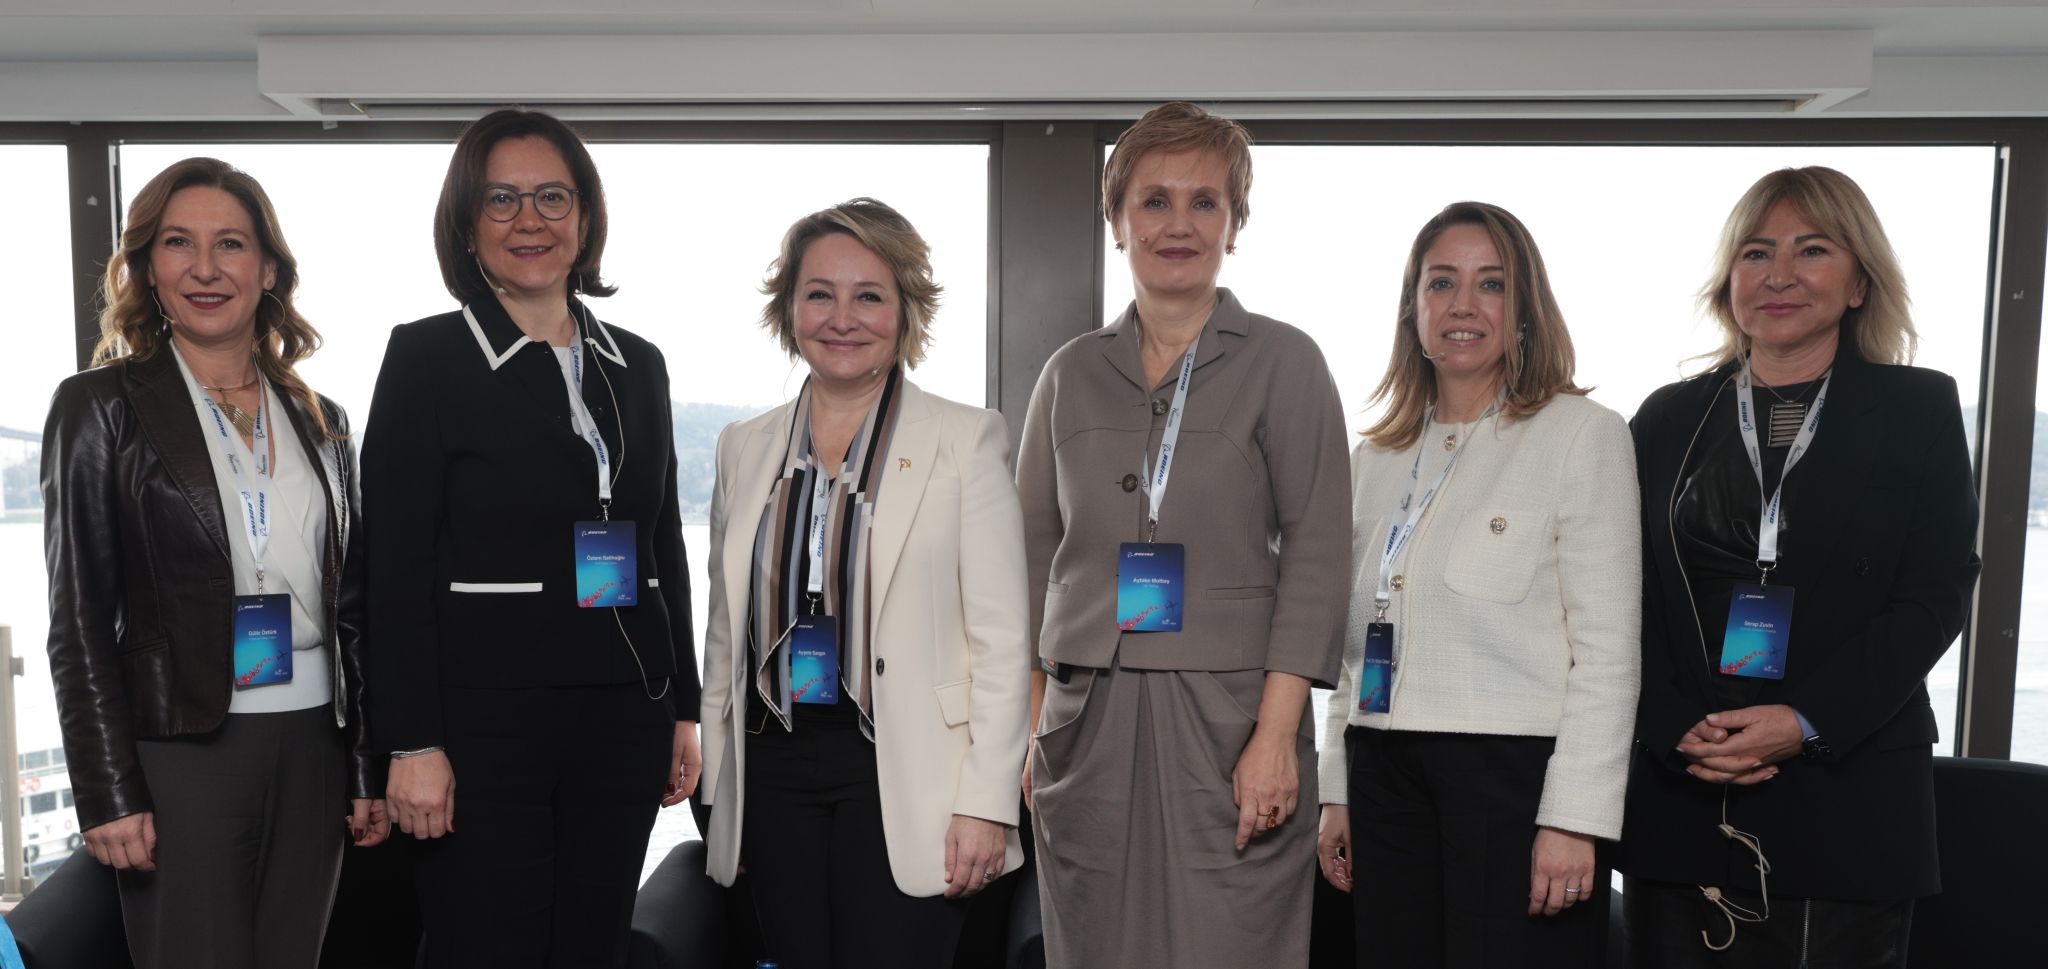 Dr. Aybike Molbay joined by her colleagues at the inaugural Women in Aviation International (WAI) – Türkiye panel.